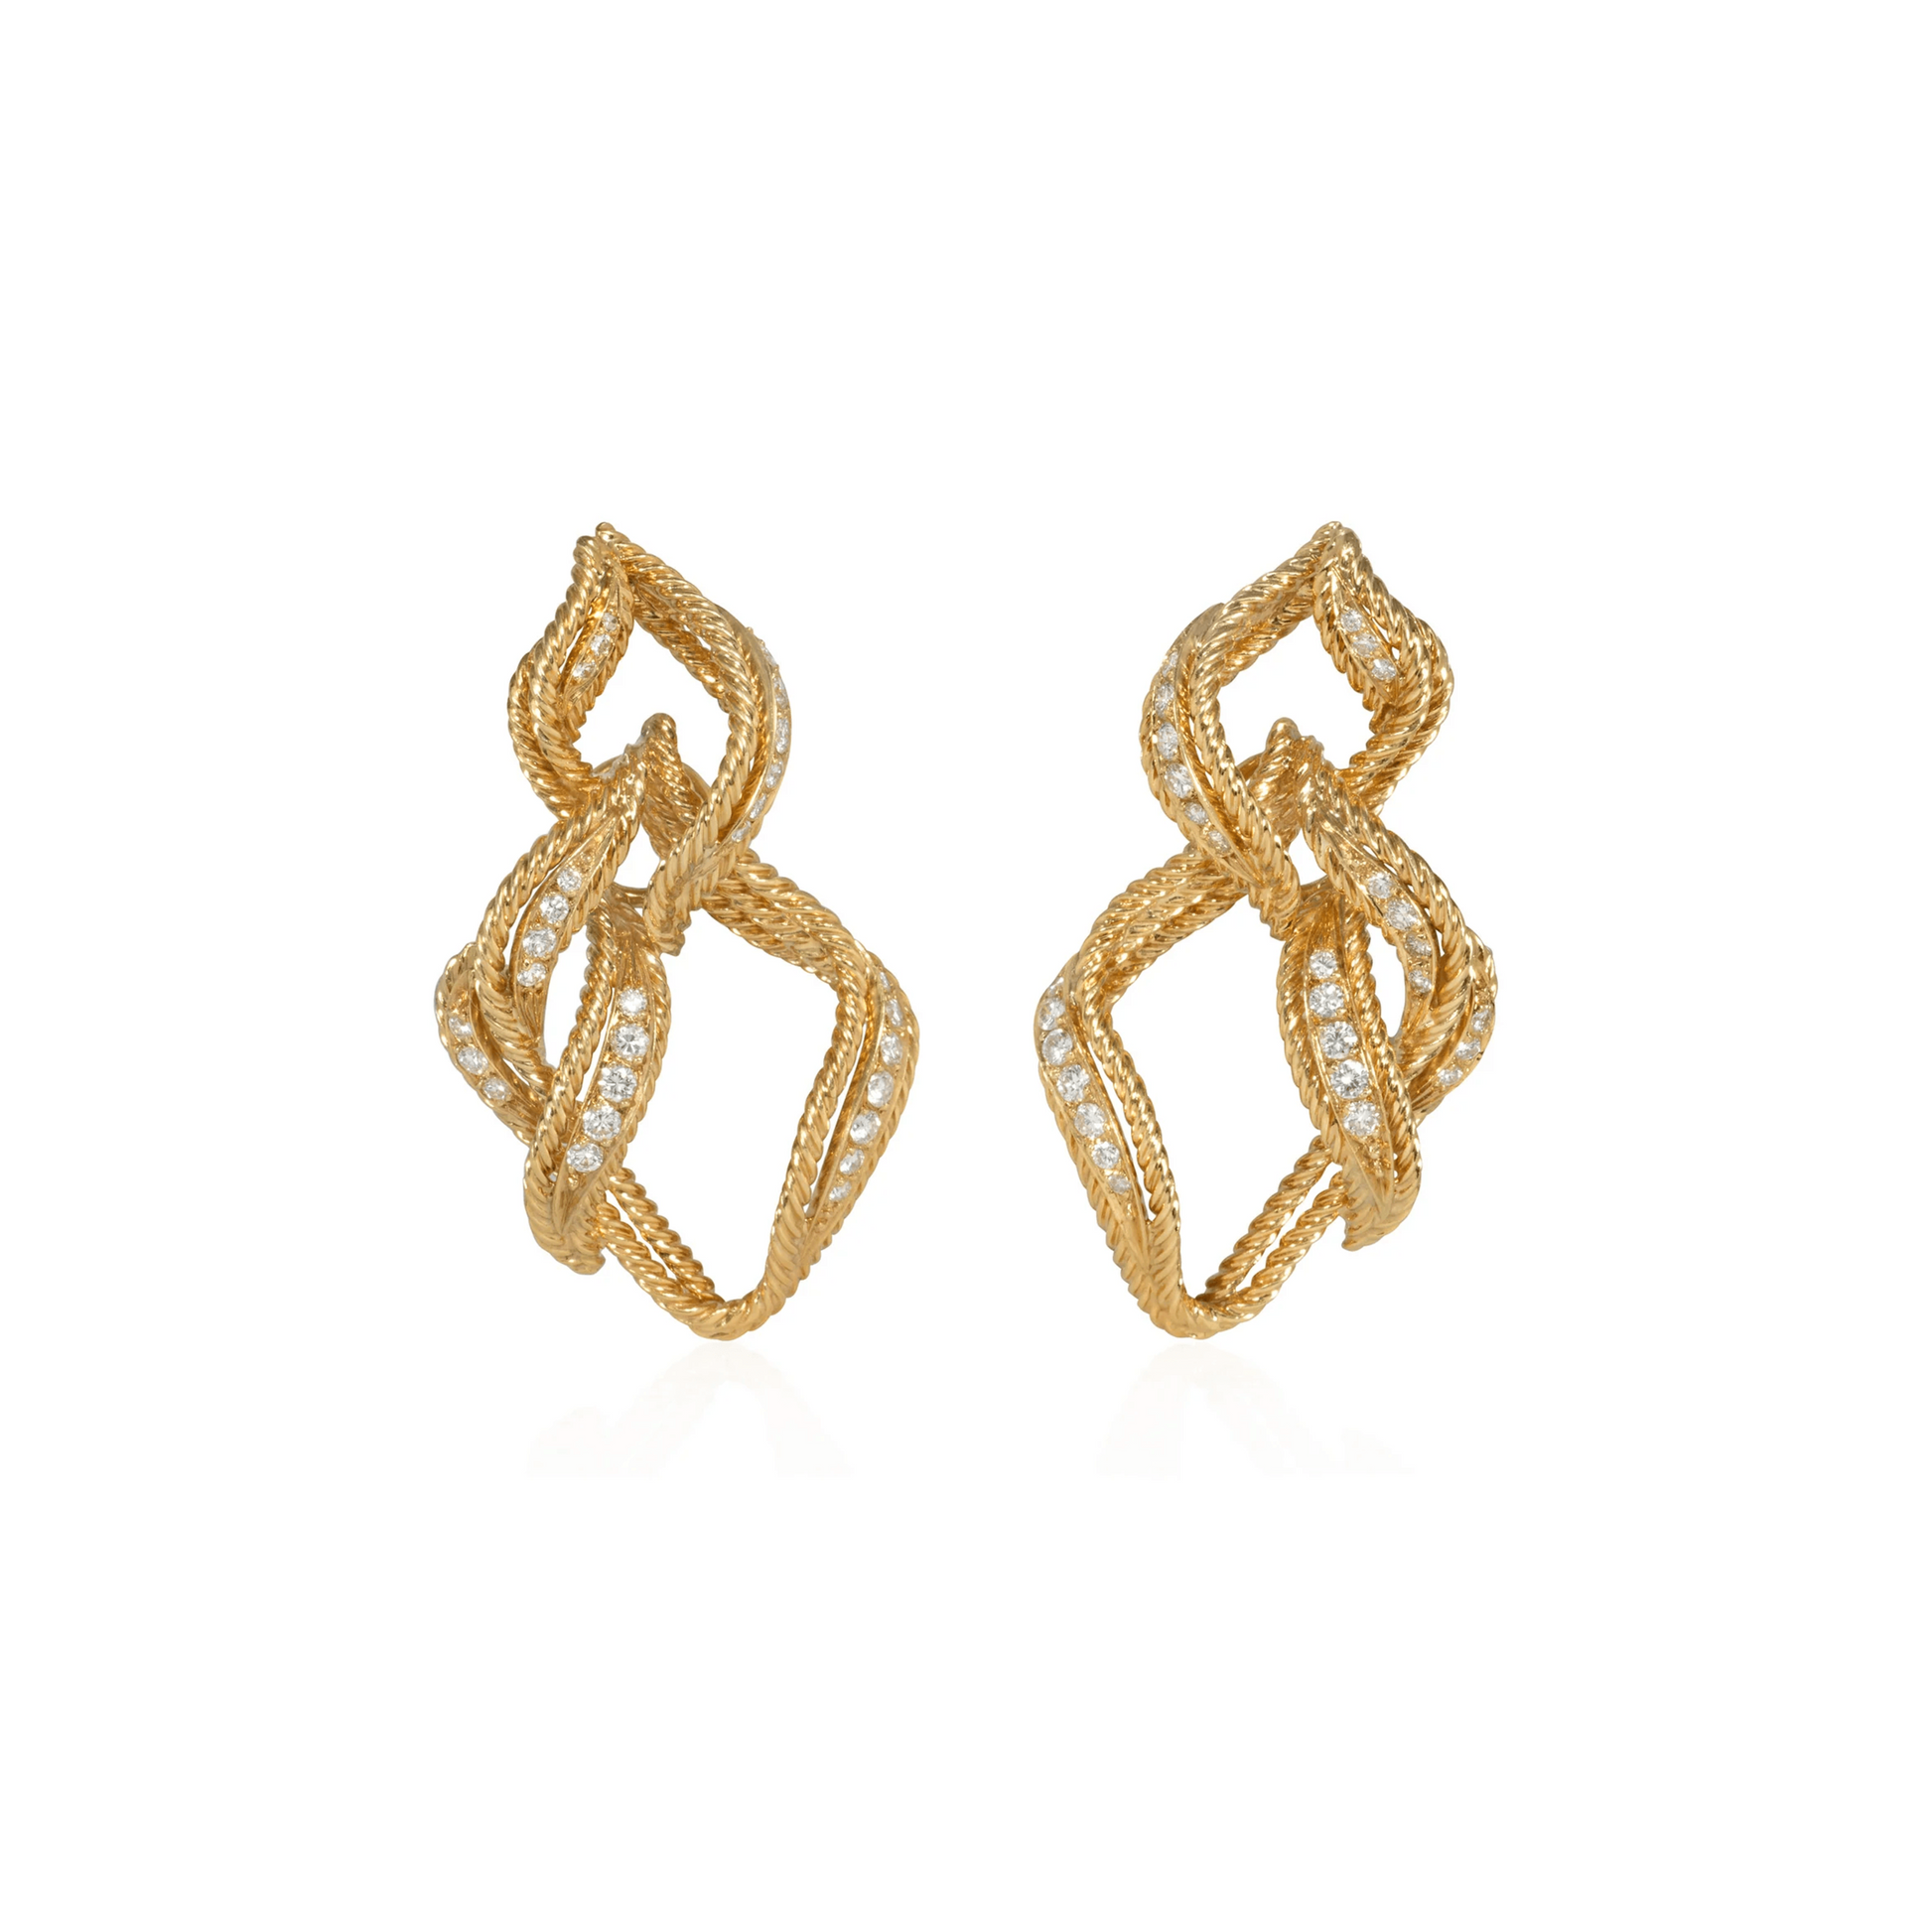 Chaumet 1970s 18KT Yellow Gold Diamond Earrings front